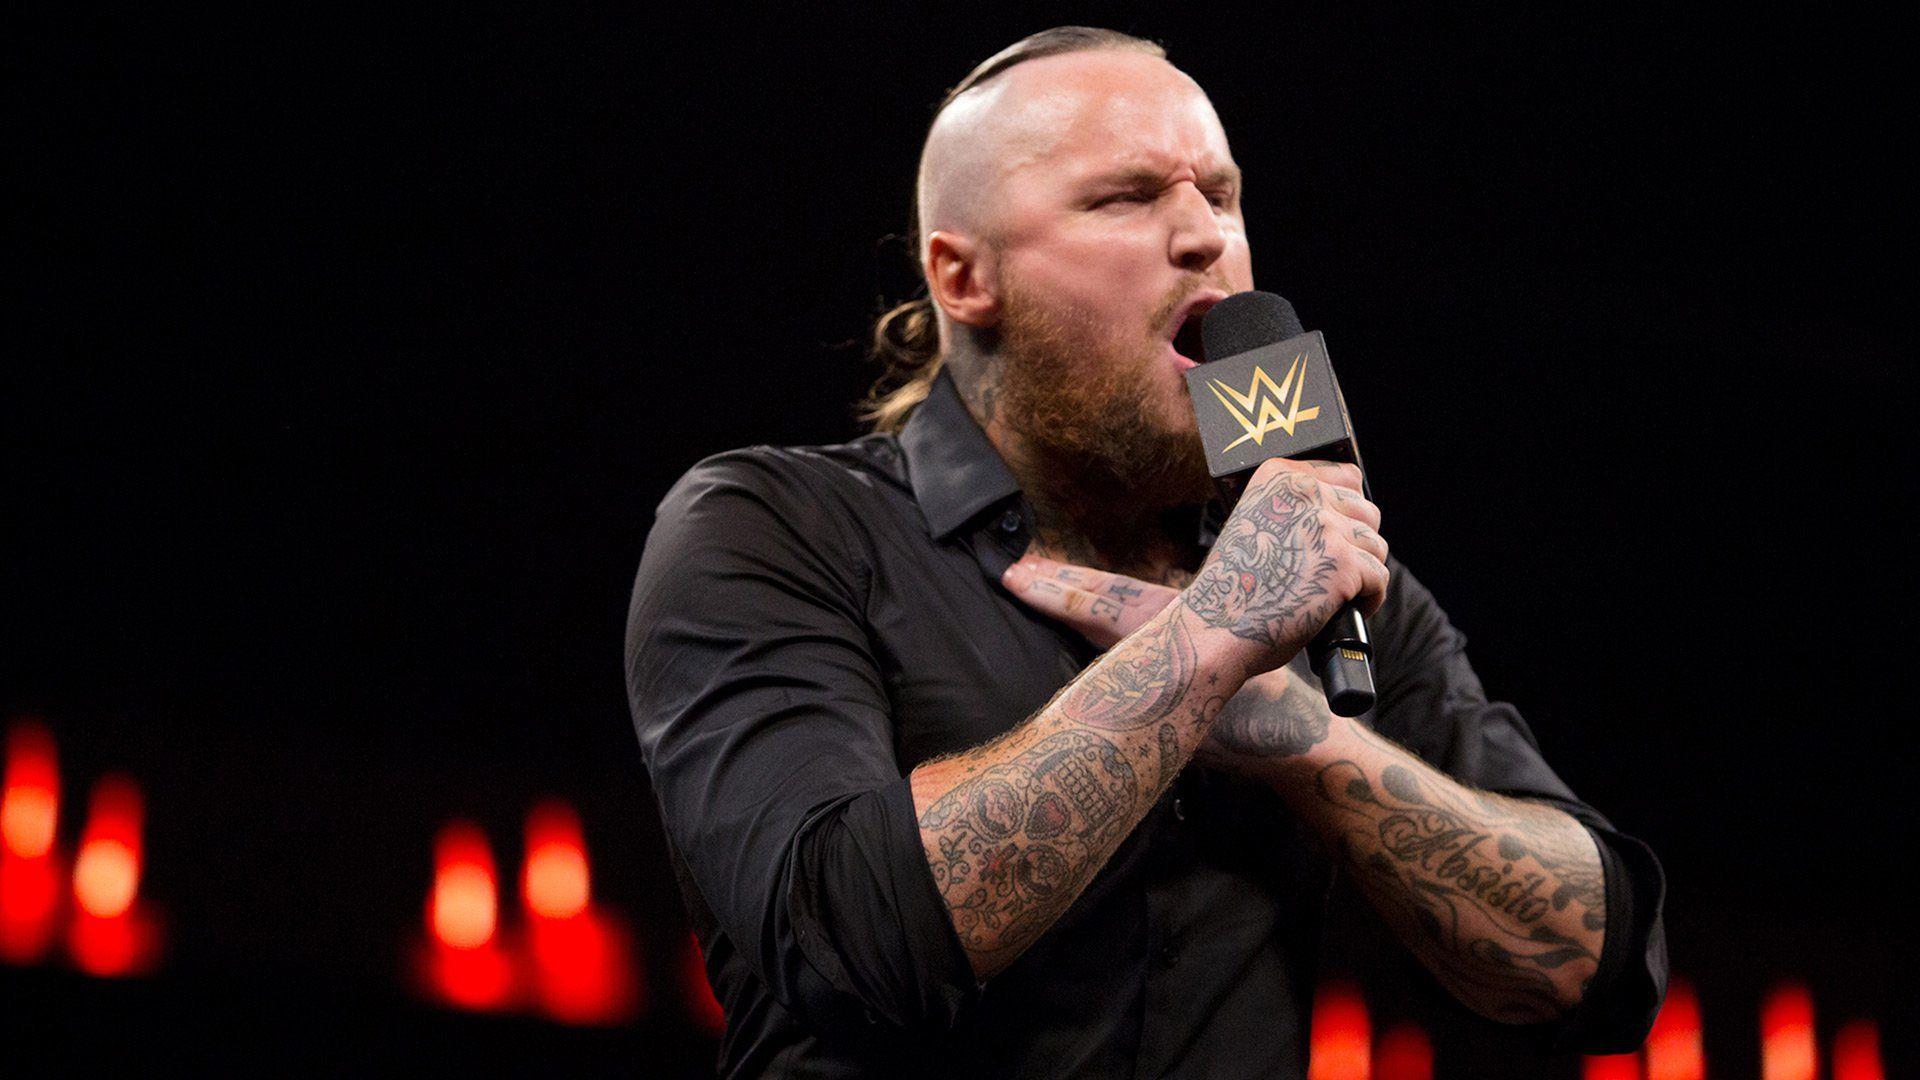 Aleister Black speaks for the first time in NXT: WWE NXT, Sept. 20